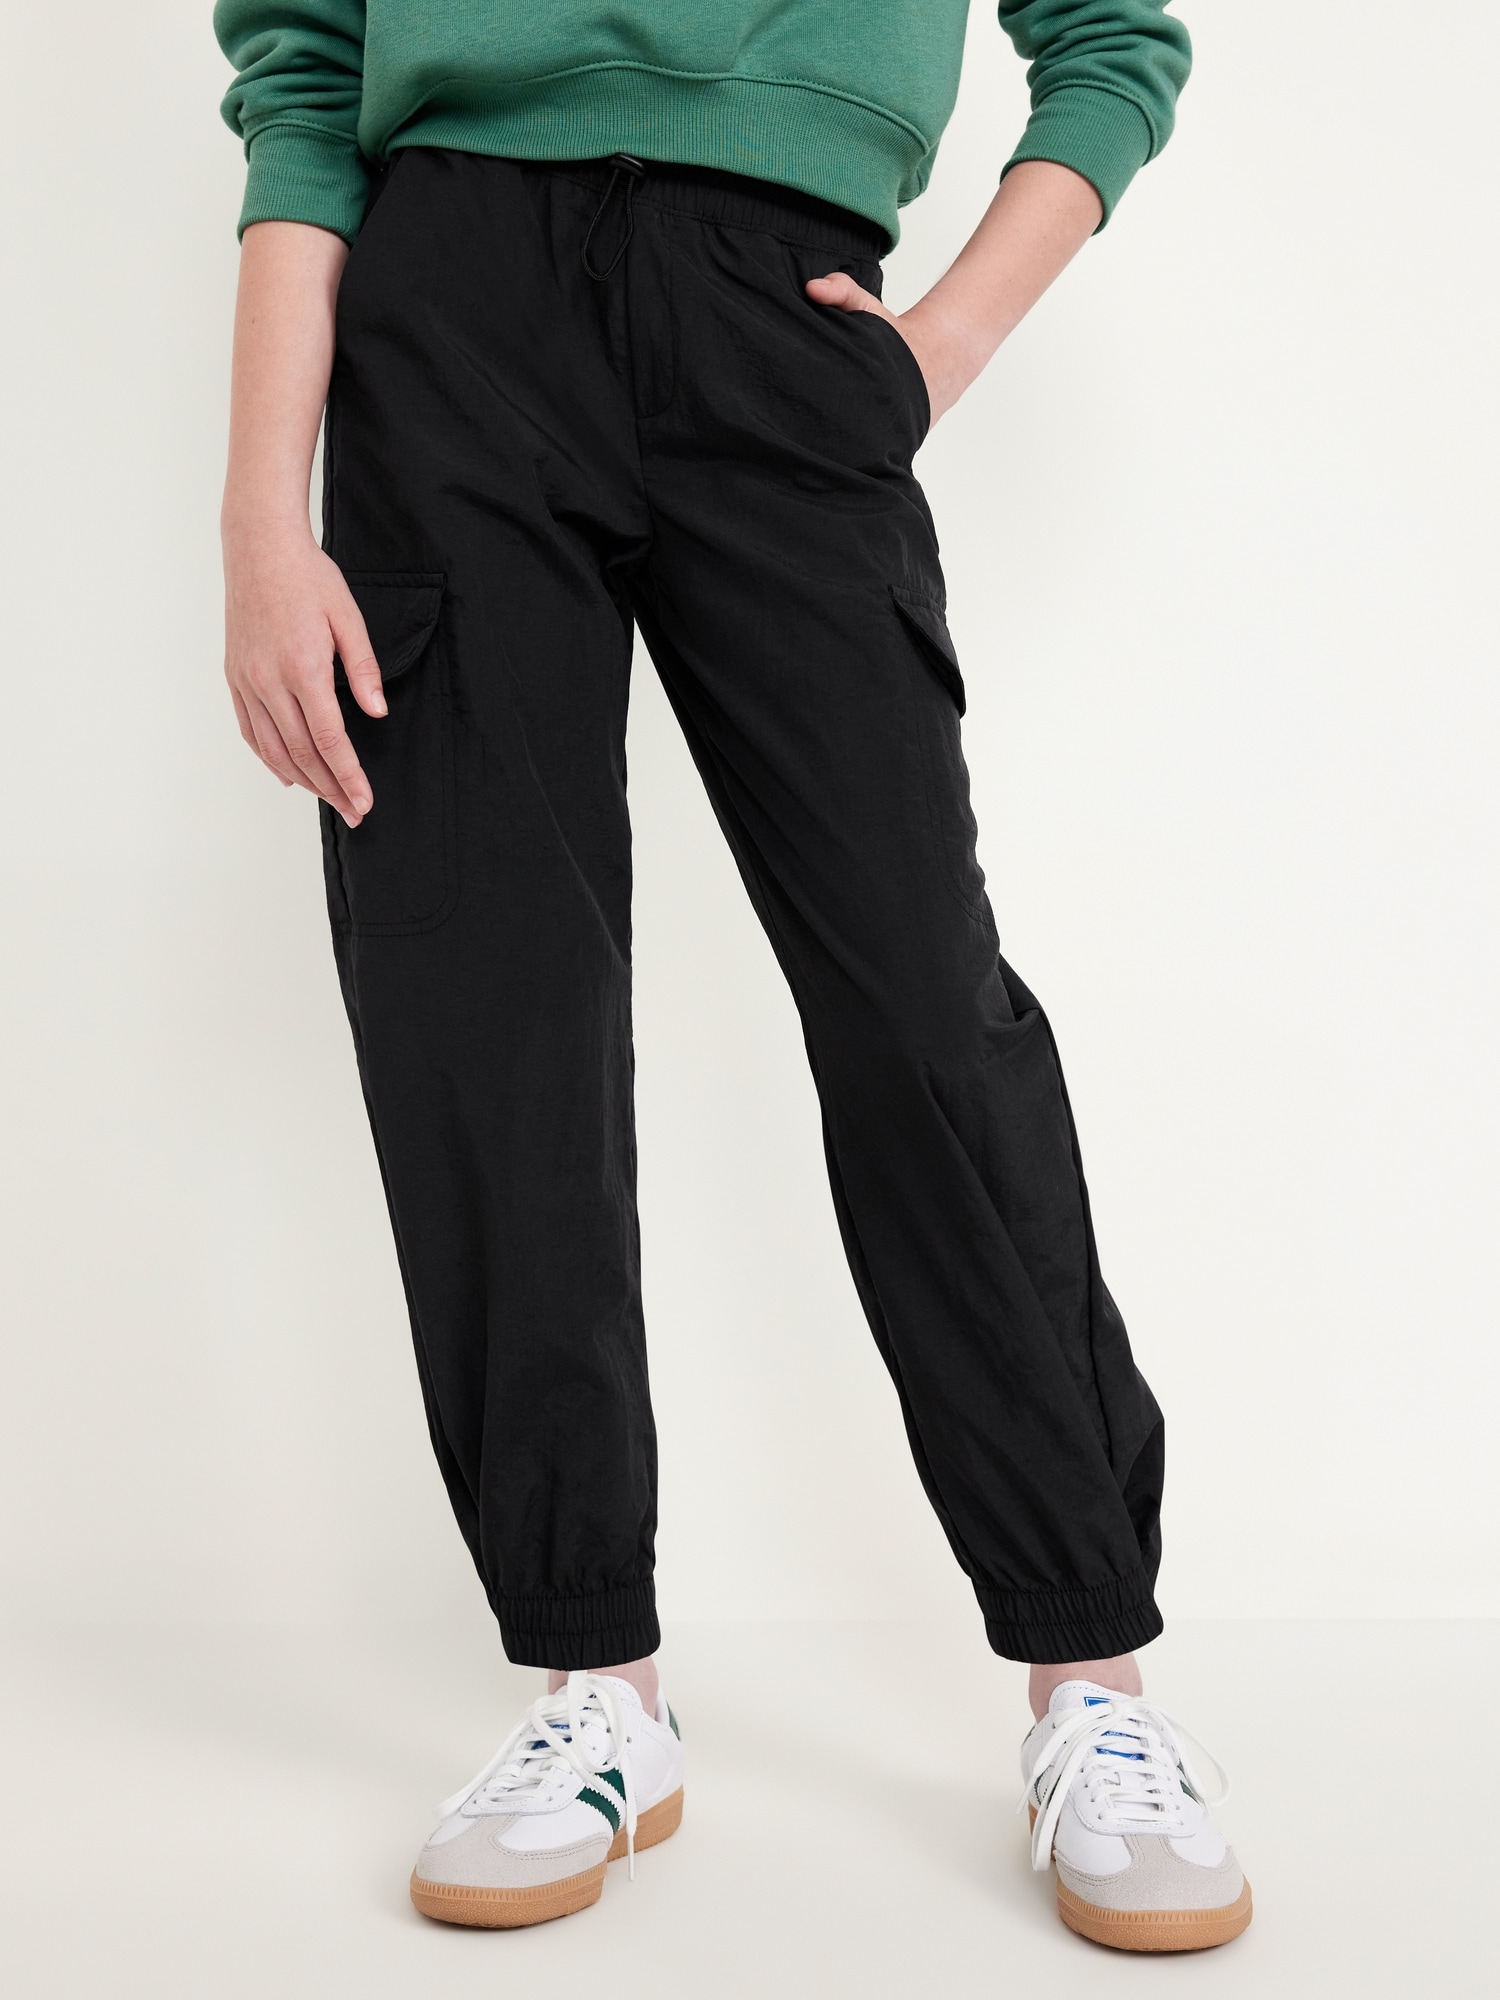 High-Waisted Loose Cargo Performance Pants for Girls